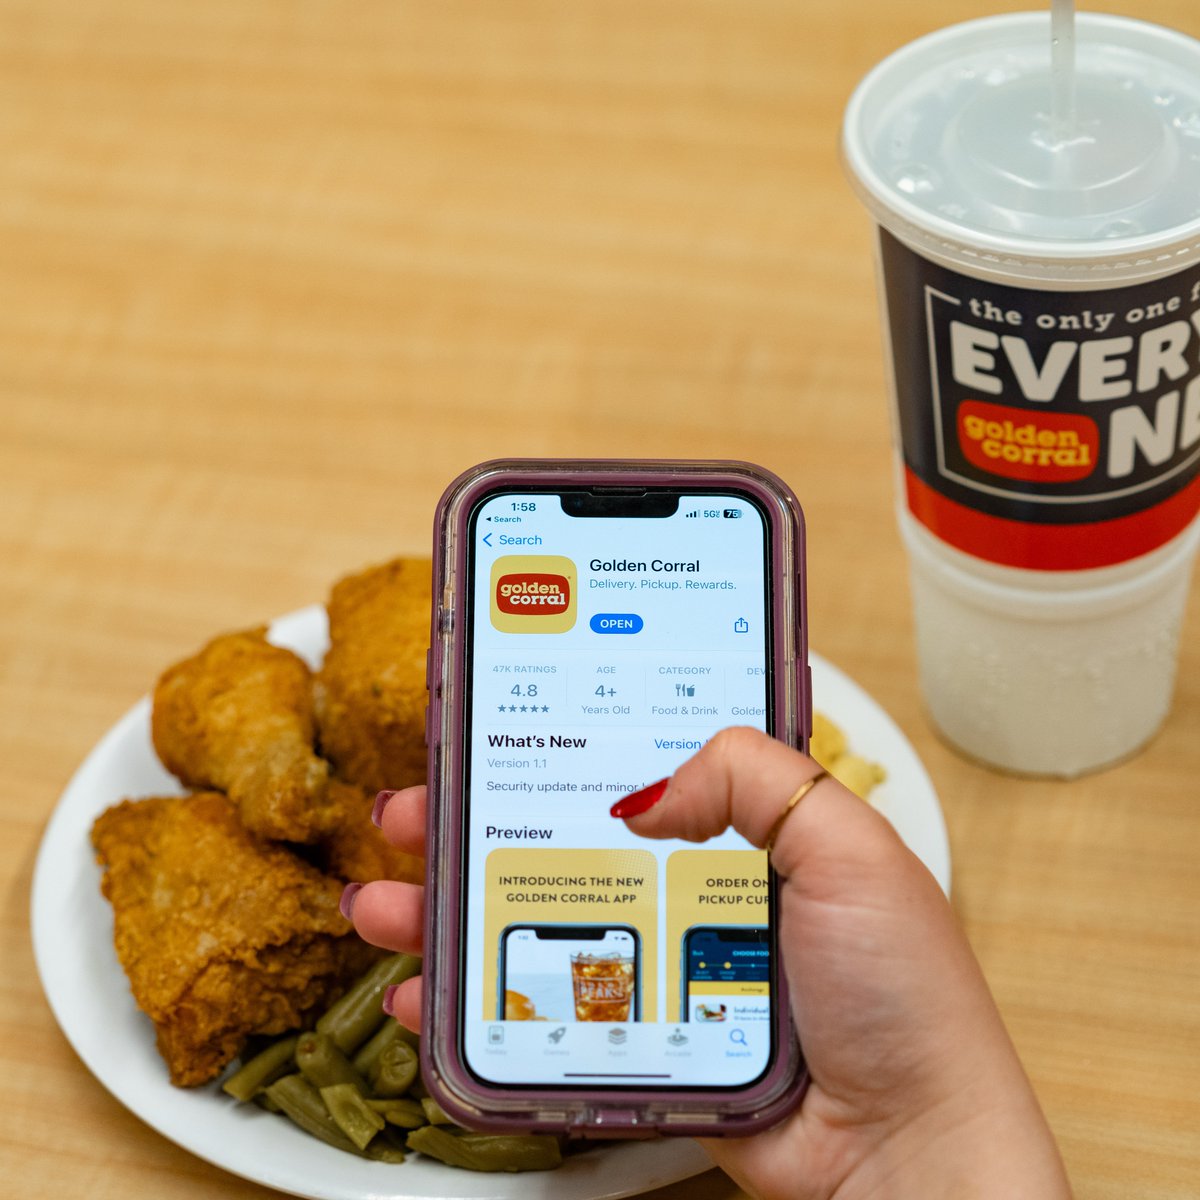 Download the app, collect the points, redeem for deliciousness!